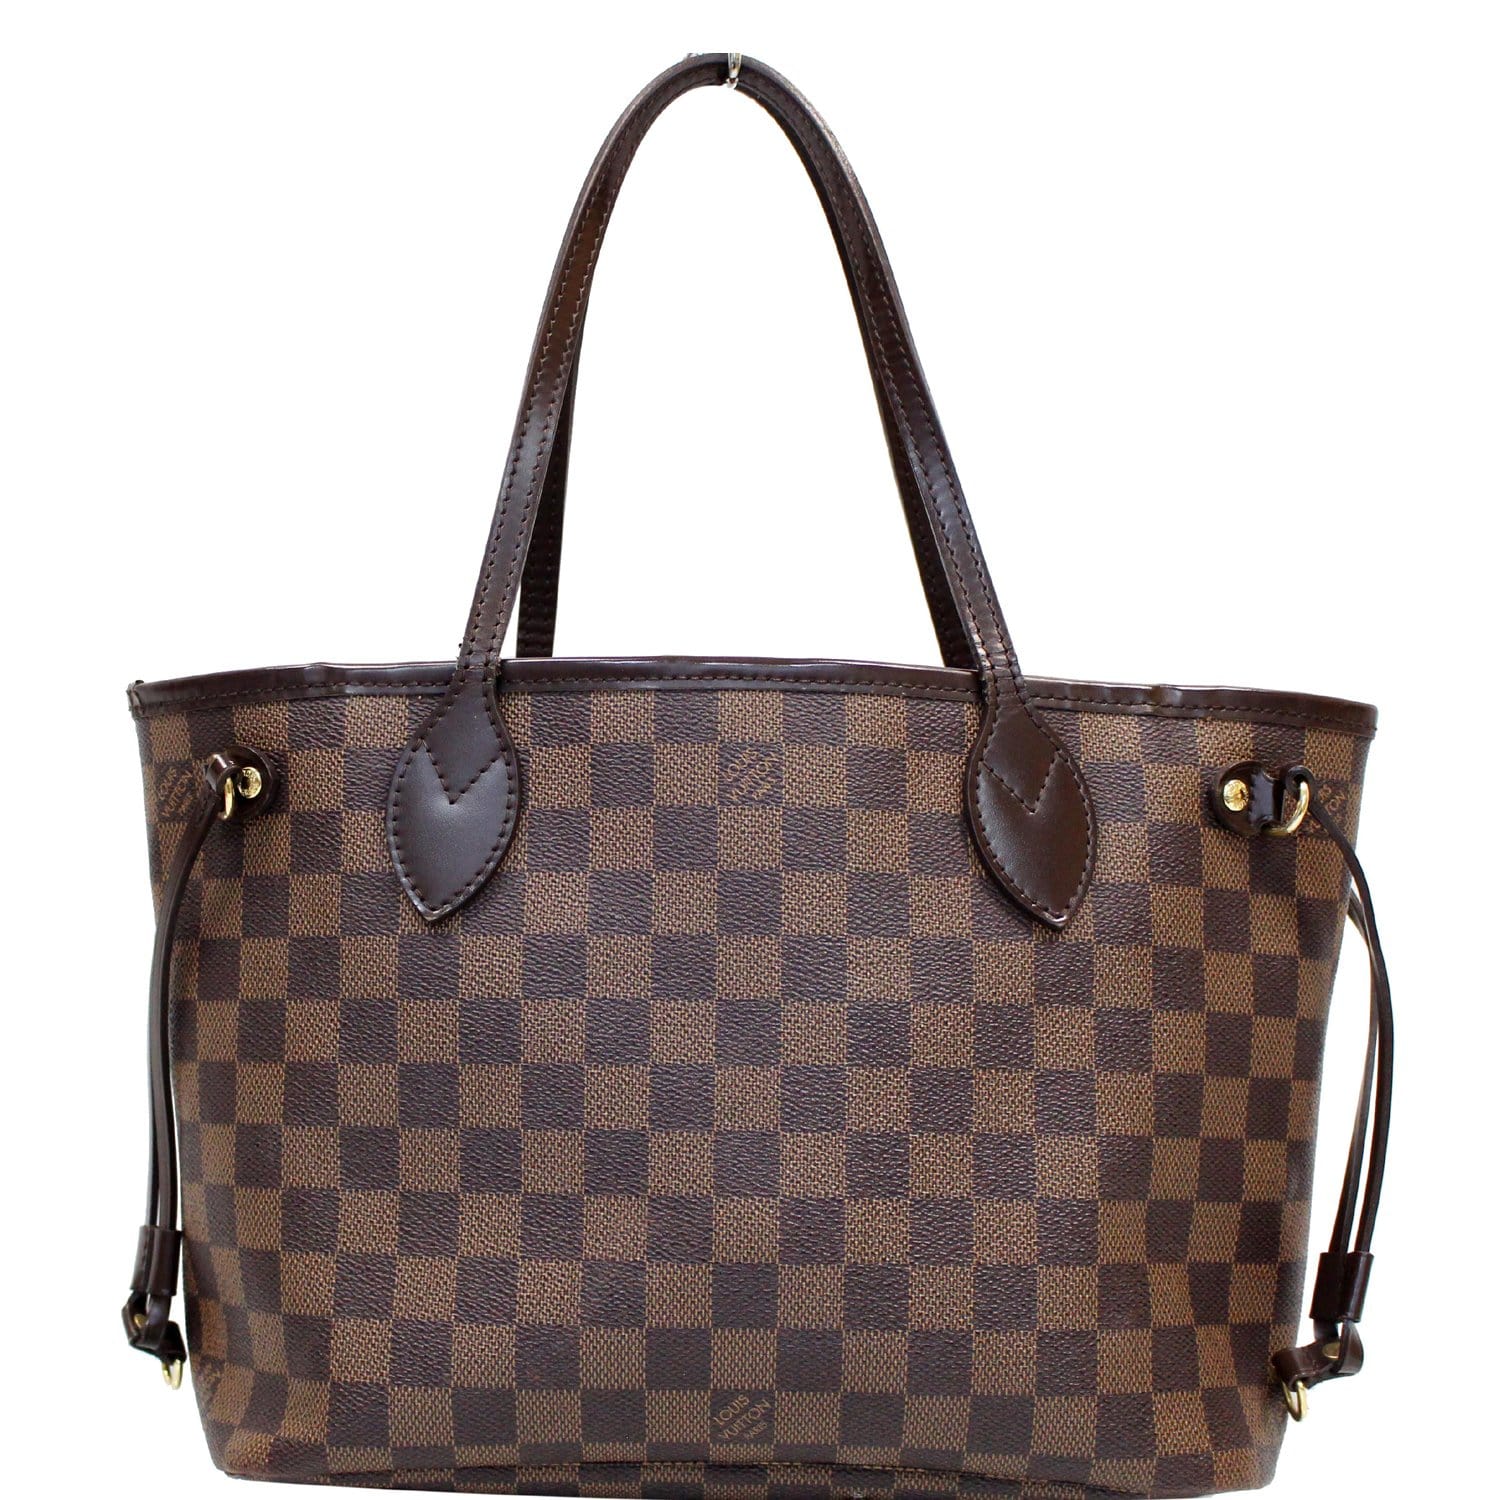 😍 2020 LOUIS VUITTON NEVERFULL PM! The Perfect “in between bag”.. 